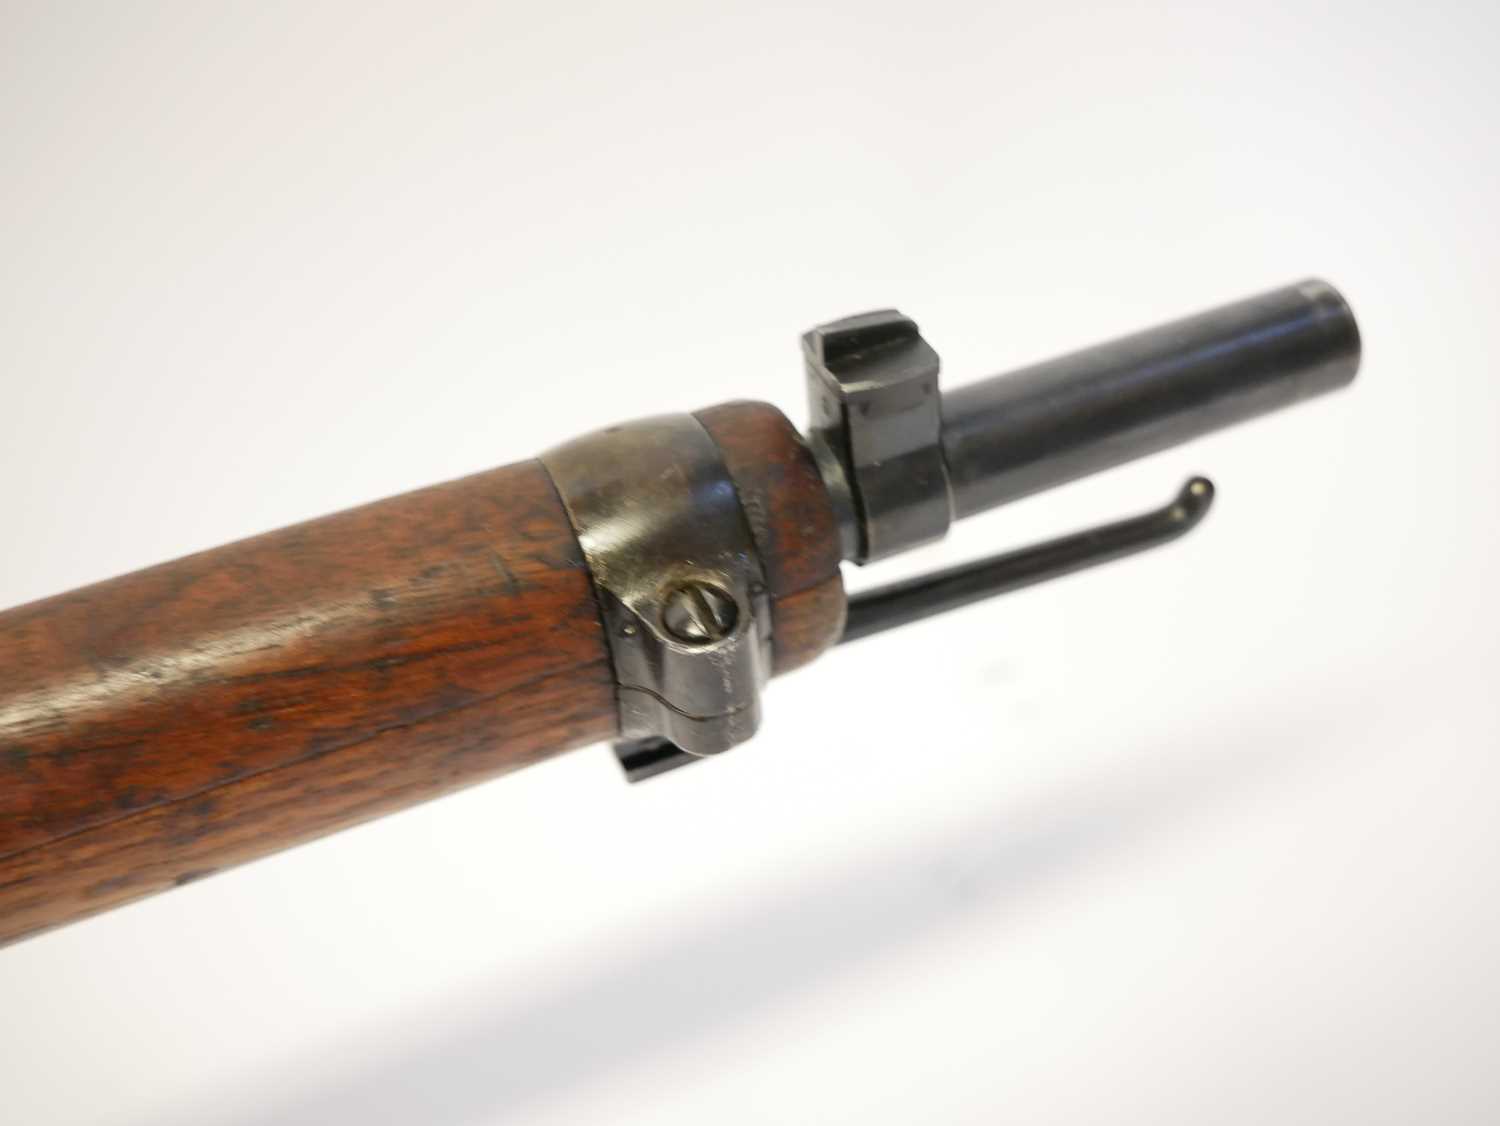 Schmidt Rubin 1896 7.5mm straight pull rifle, matching serial numbers 268510 to barrel, receiver, - Image 7 of 15